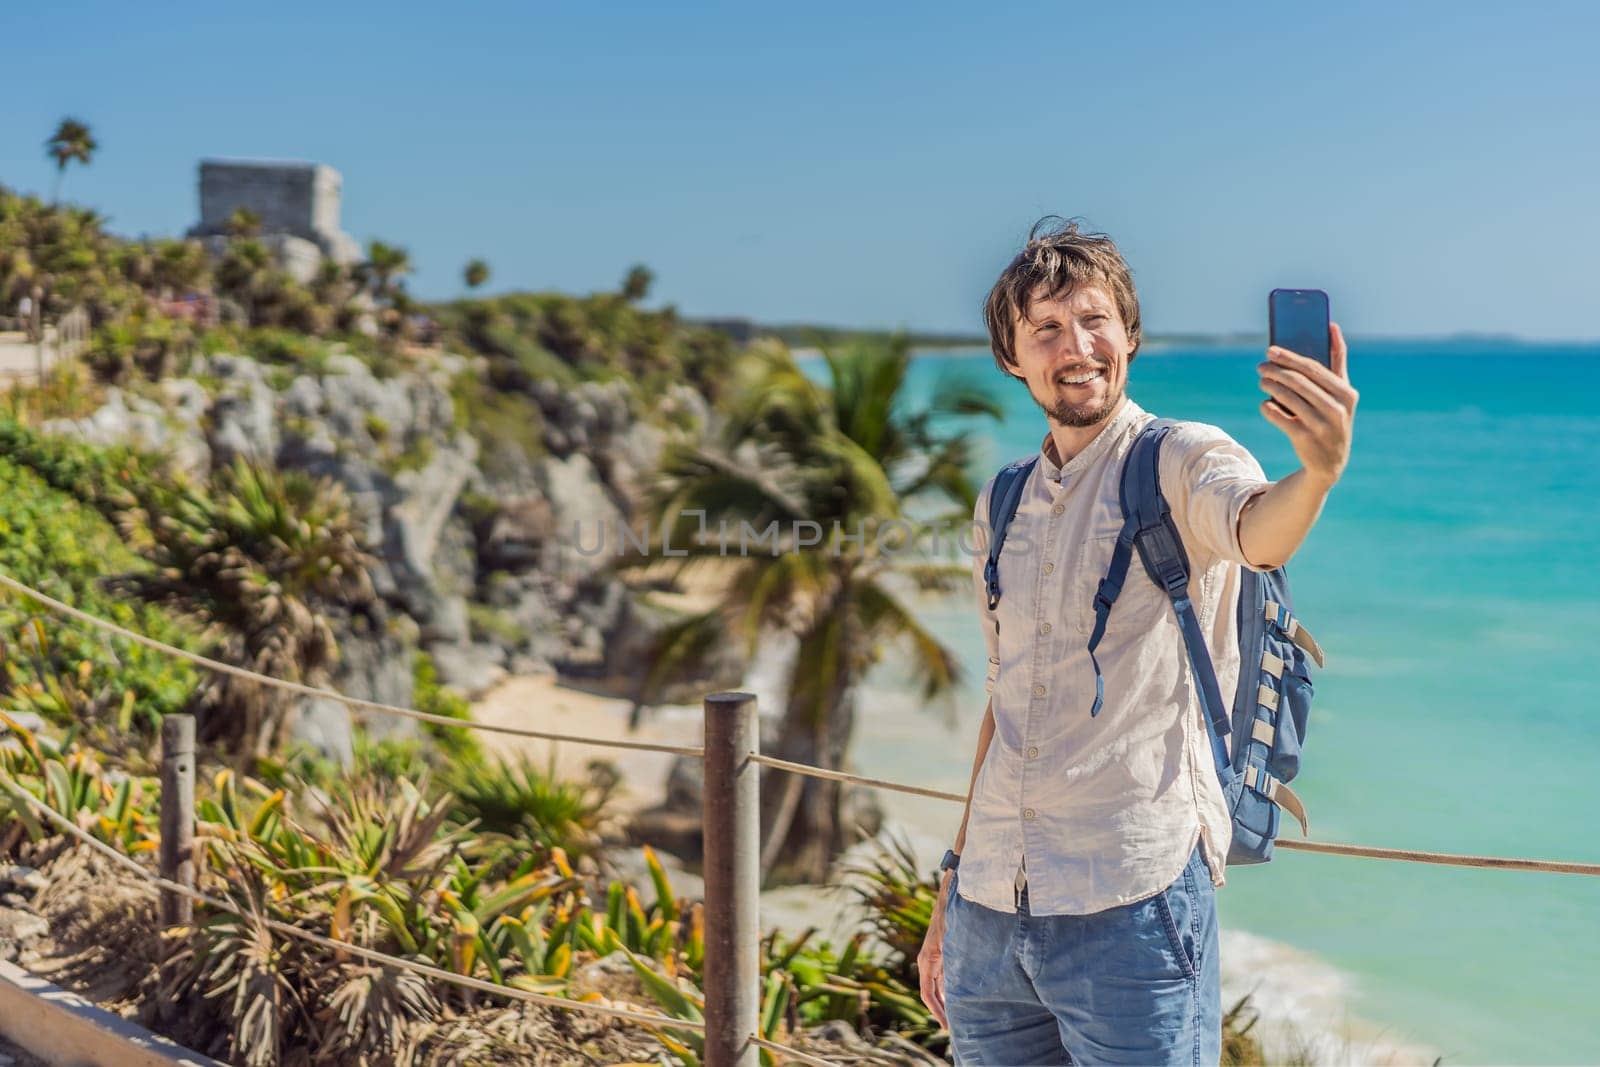 Man tourist enjoying the view Pre-Columbian Mayan walled city of Tulum, Quintana Roo, Mexico, North America, Tulum, Mexico. El Castillo - castle the Mayan city of Tulum main temple.